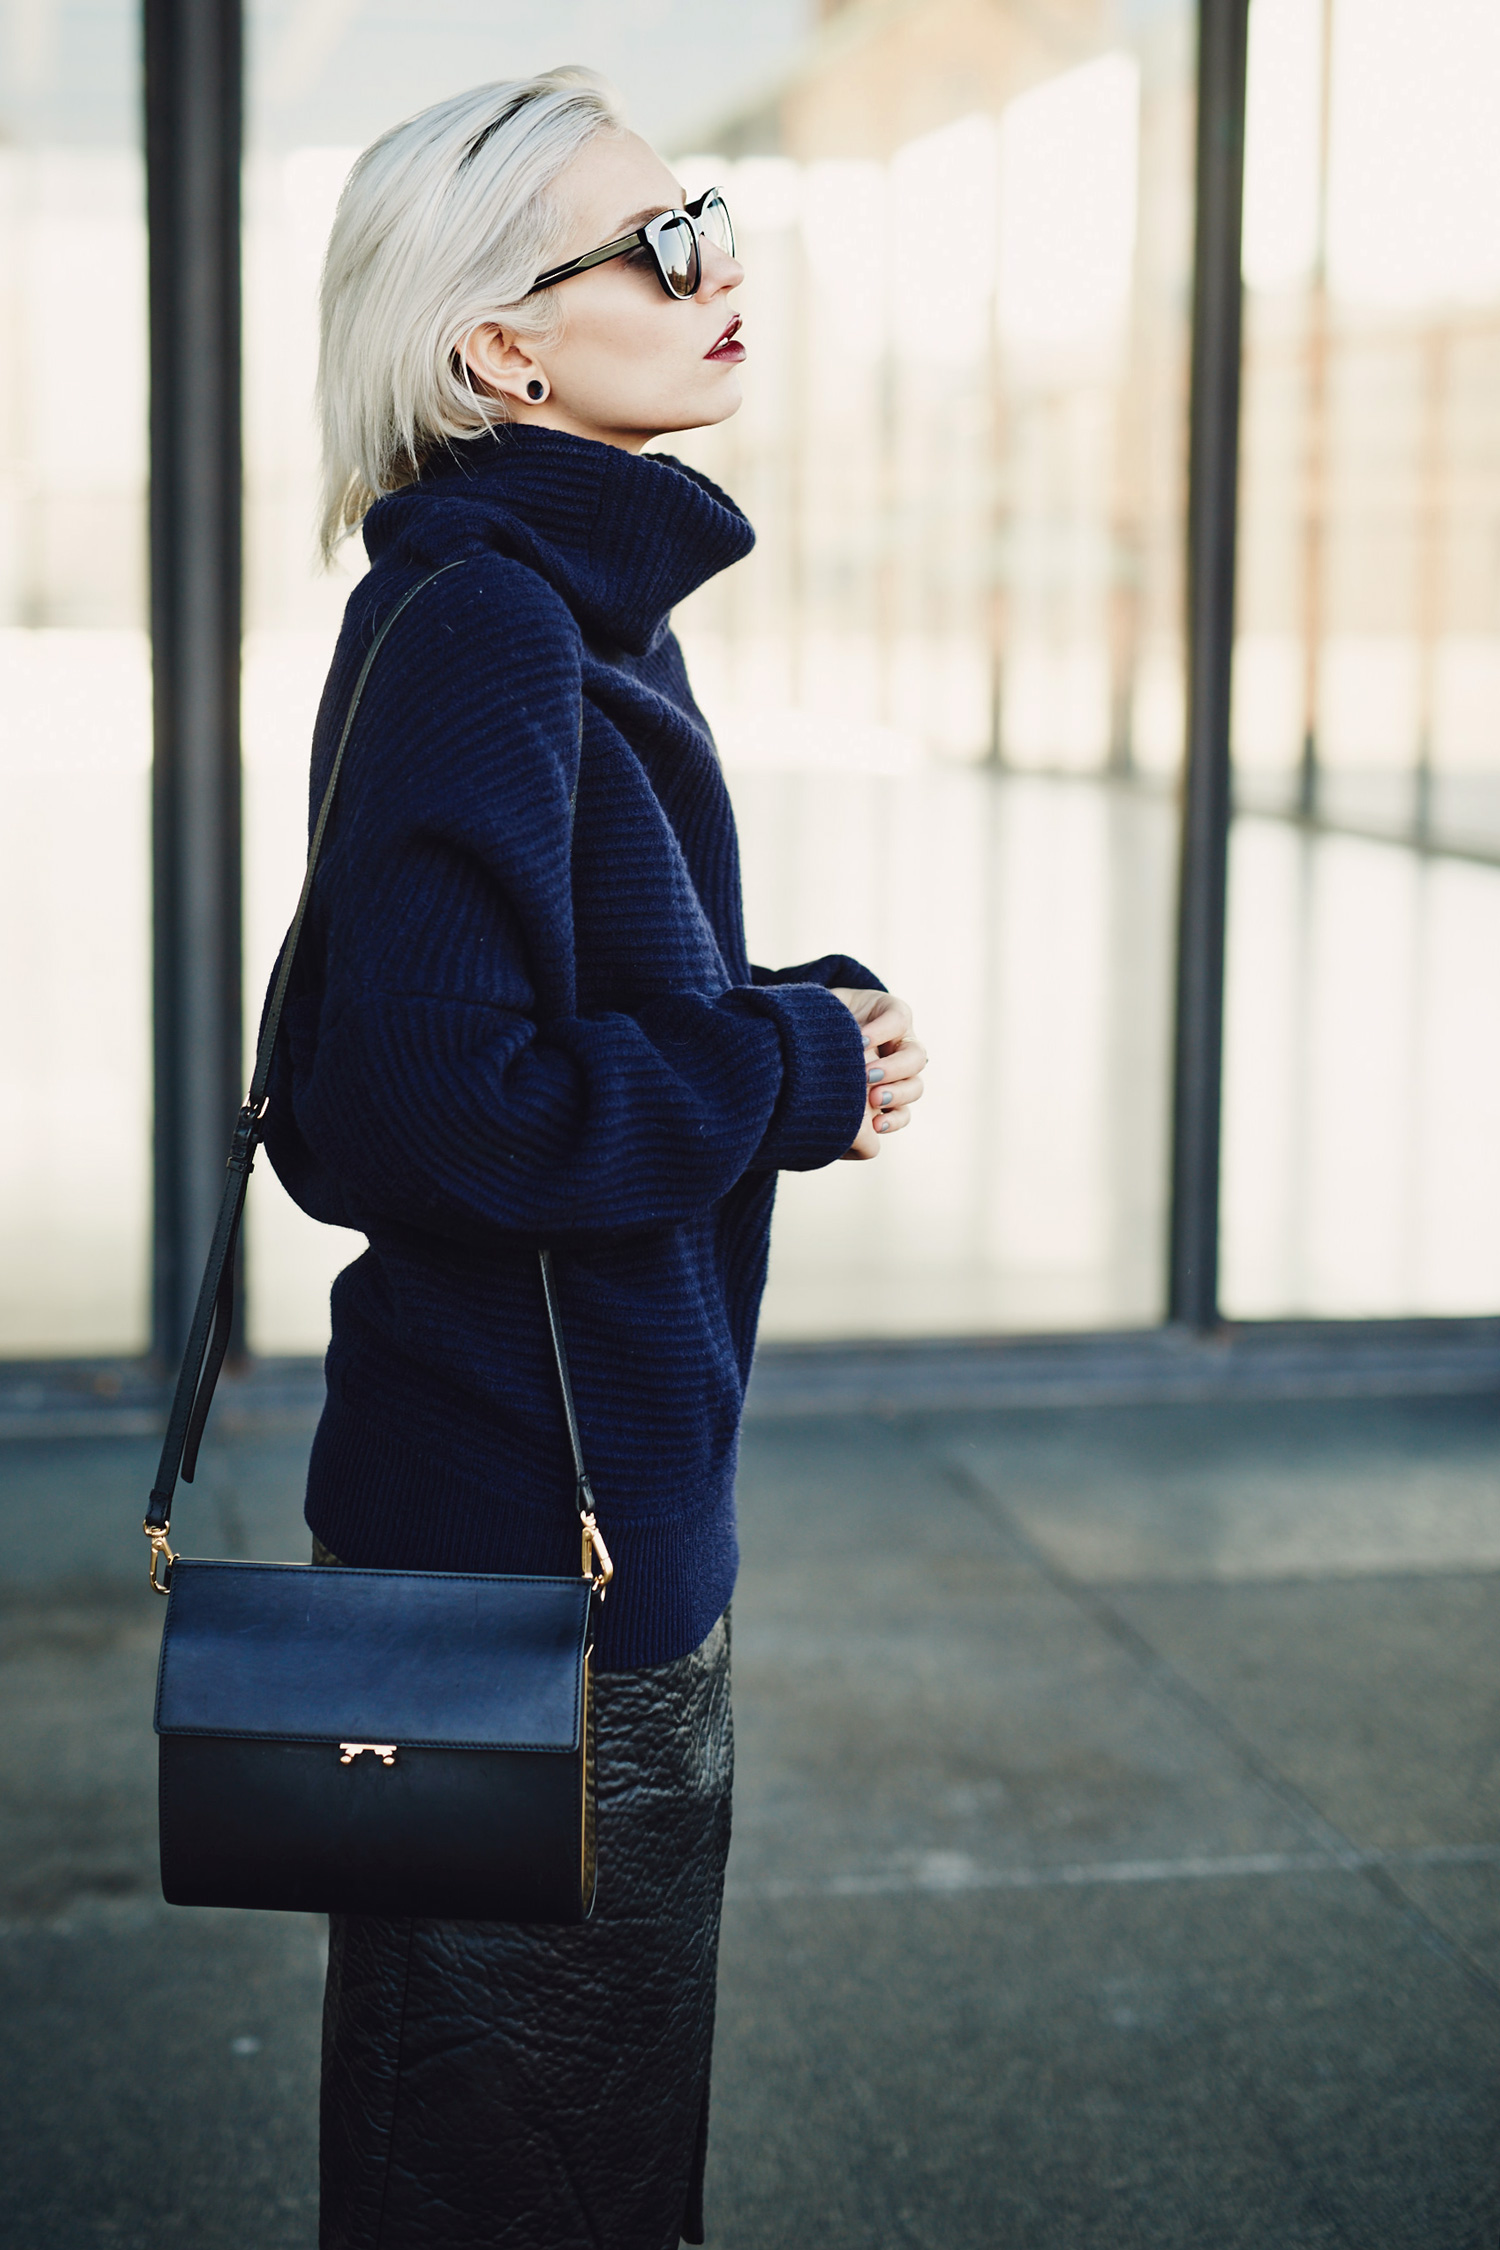 view more details on my blog | street style, fashion, berlin, edgy | featuring Victoria Beckham, Acne Studios, Marni, FindersKeepers | via Masha Sedgwick